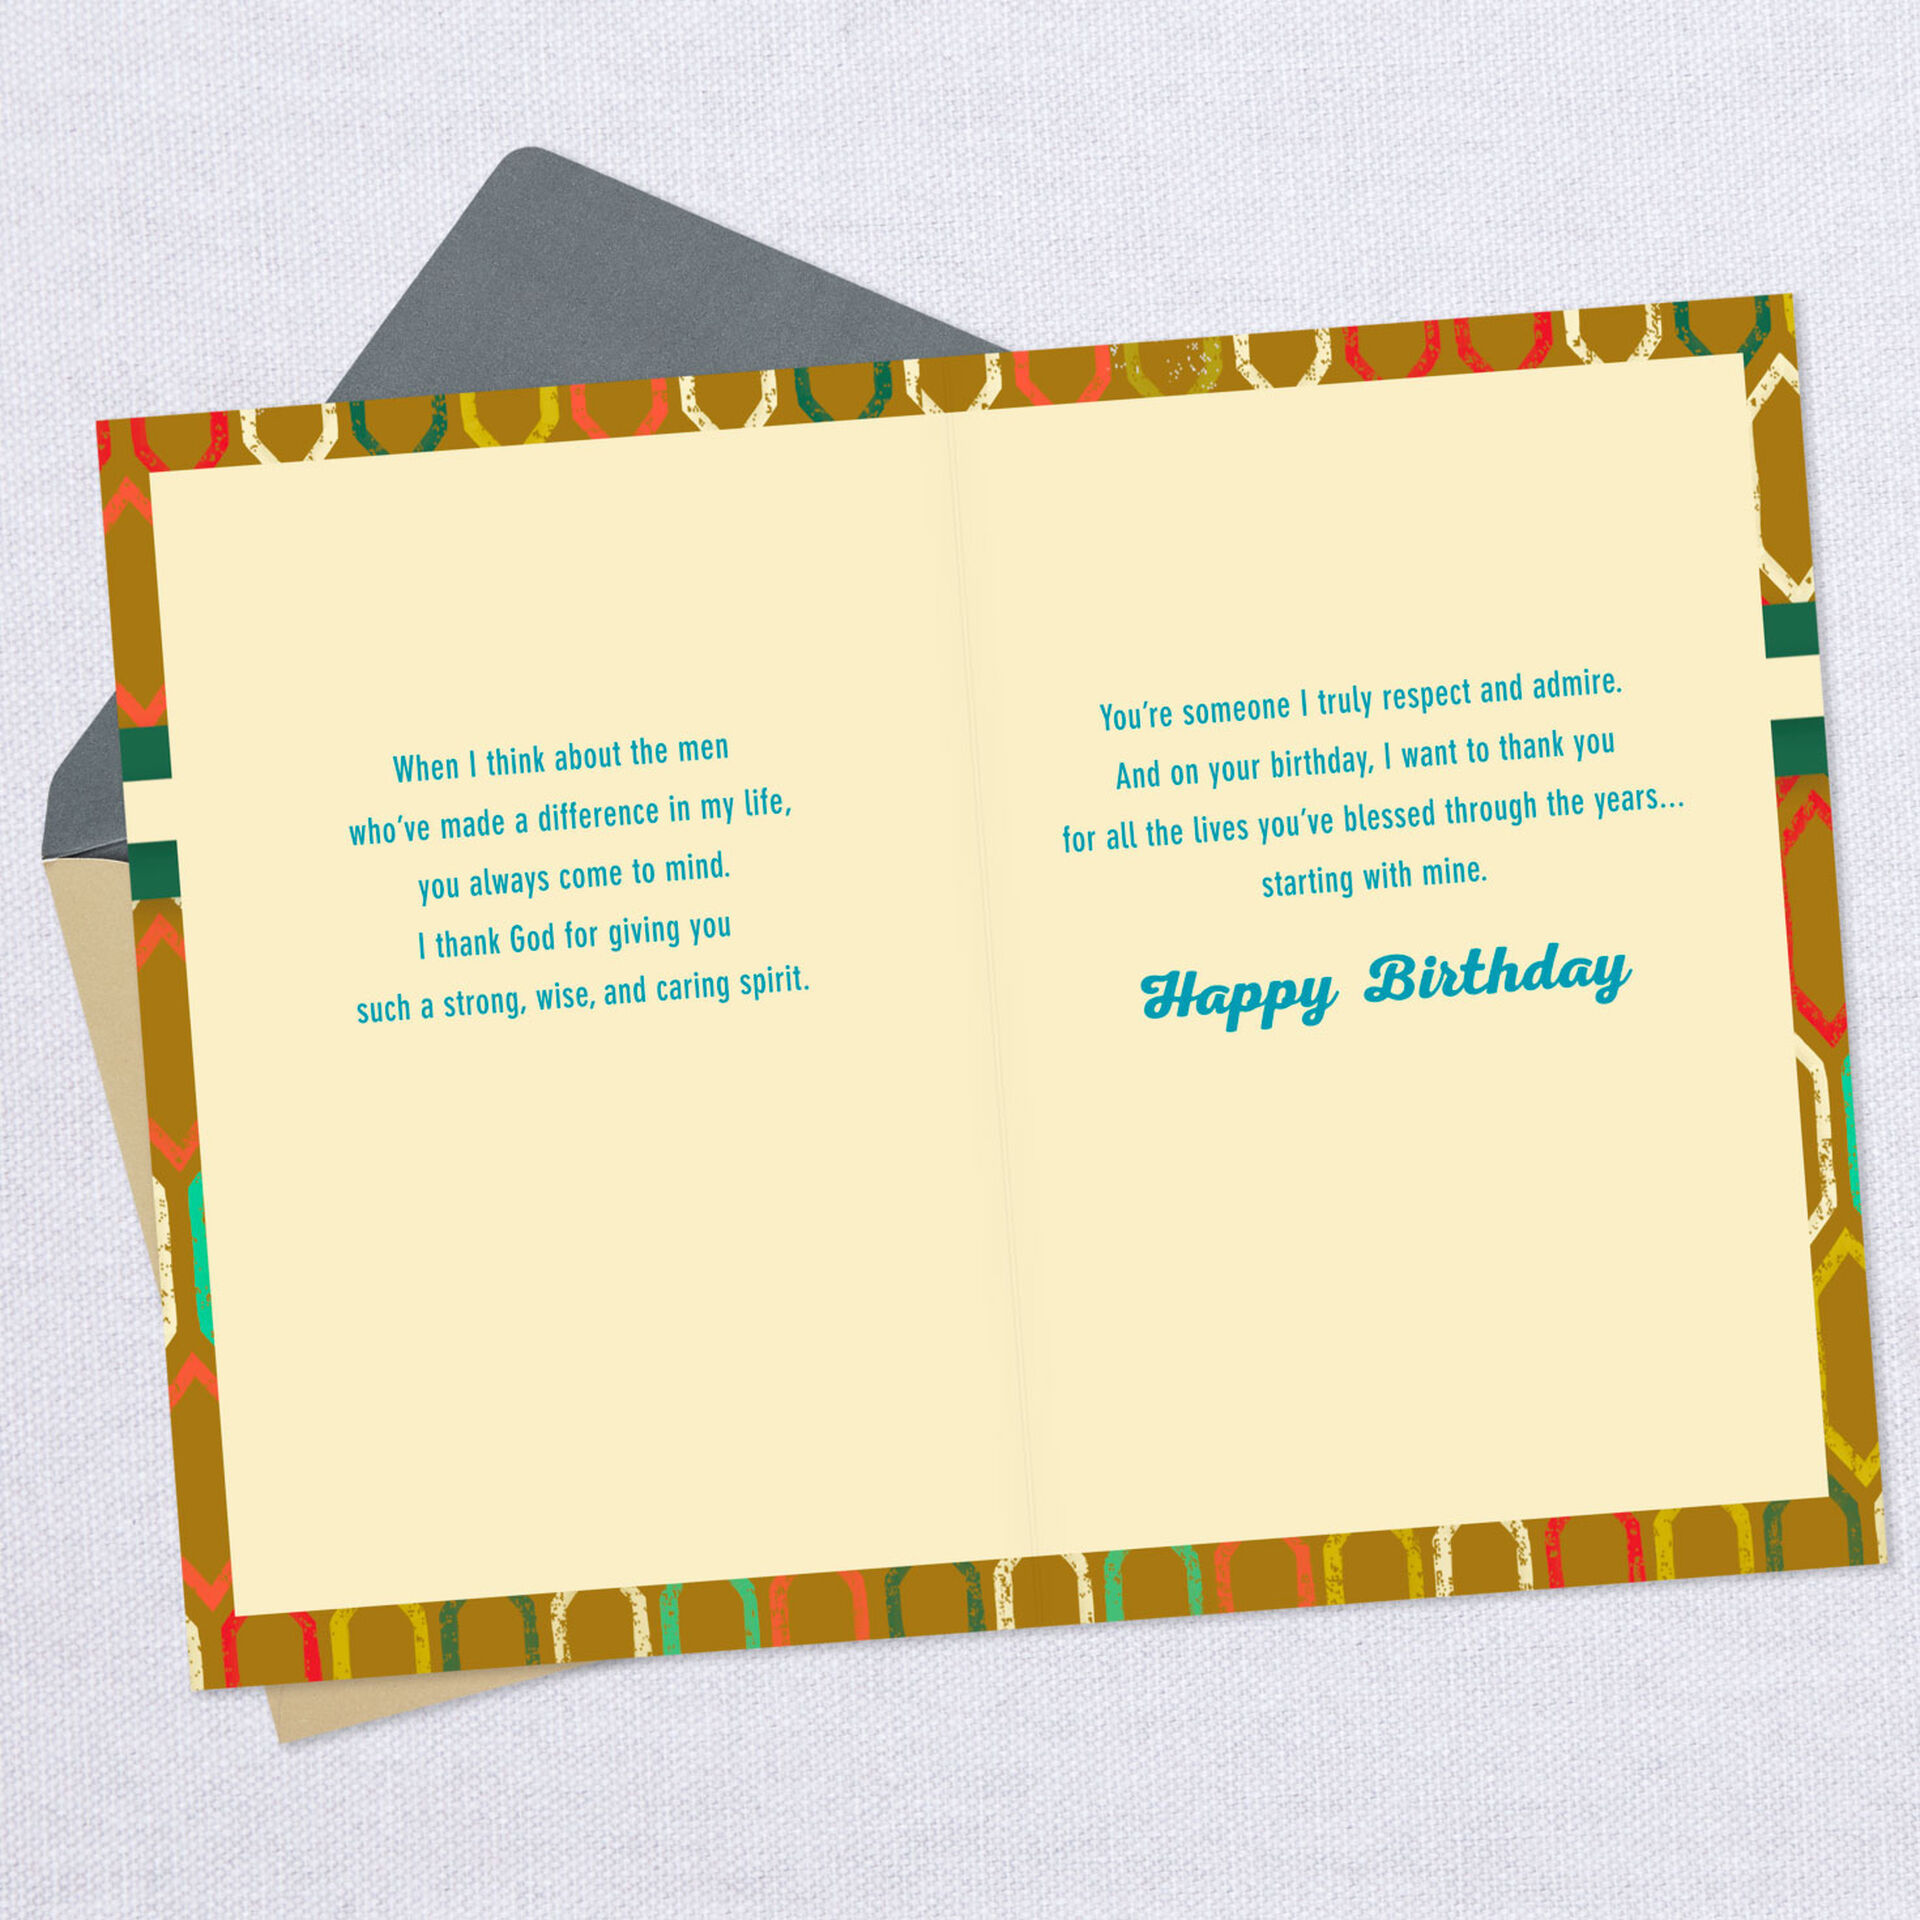 Youve-Made-a-in-My-Life-Birthday-Card_399MHB1743_04